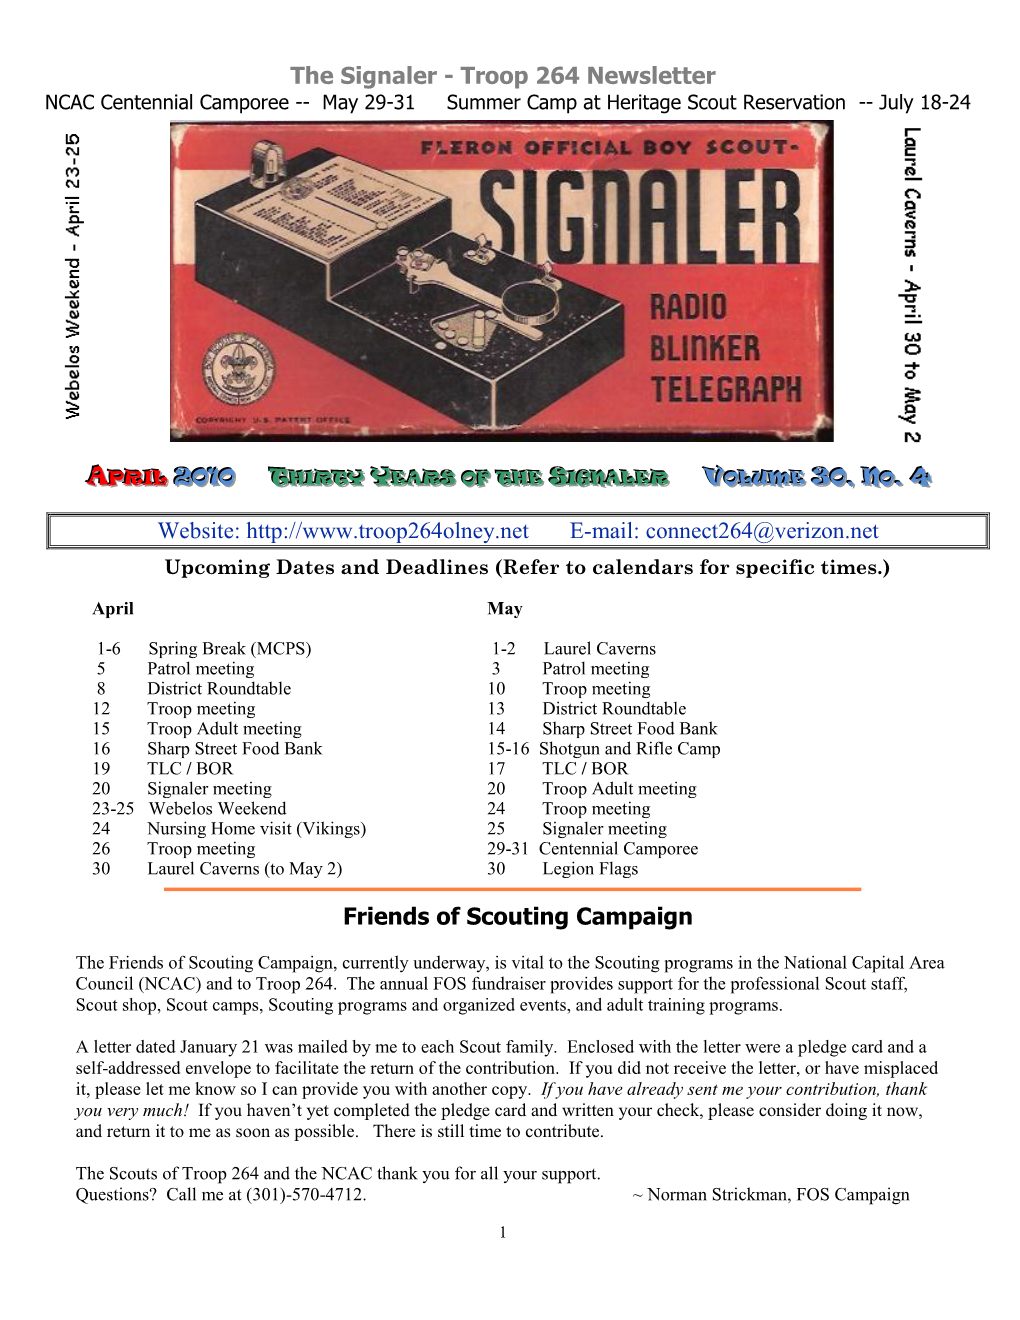 The Signaler - Troop 264 Newsletter NCAC Centennial Camporee -- May 29-31 Summer Camp at Heritage Scout Reservation -- July 18-24